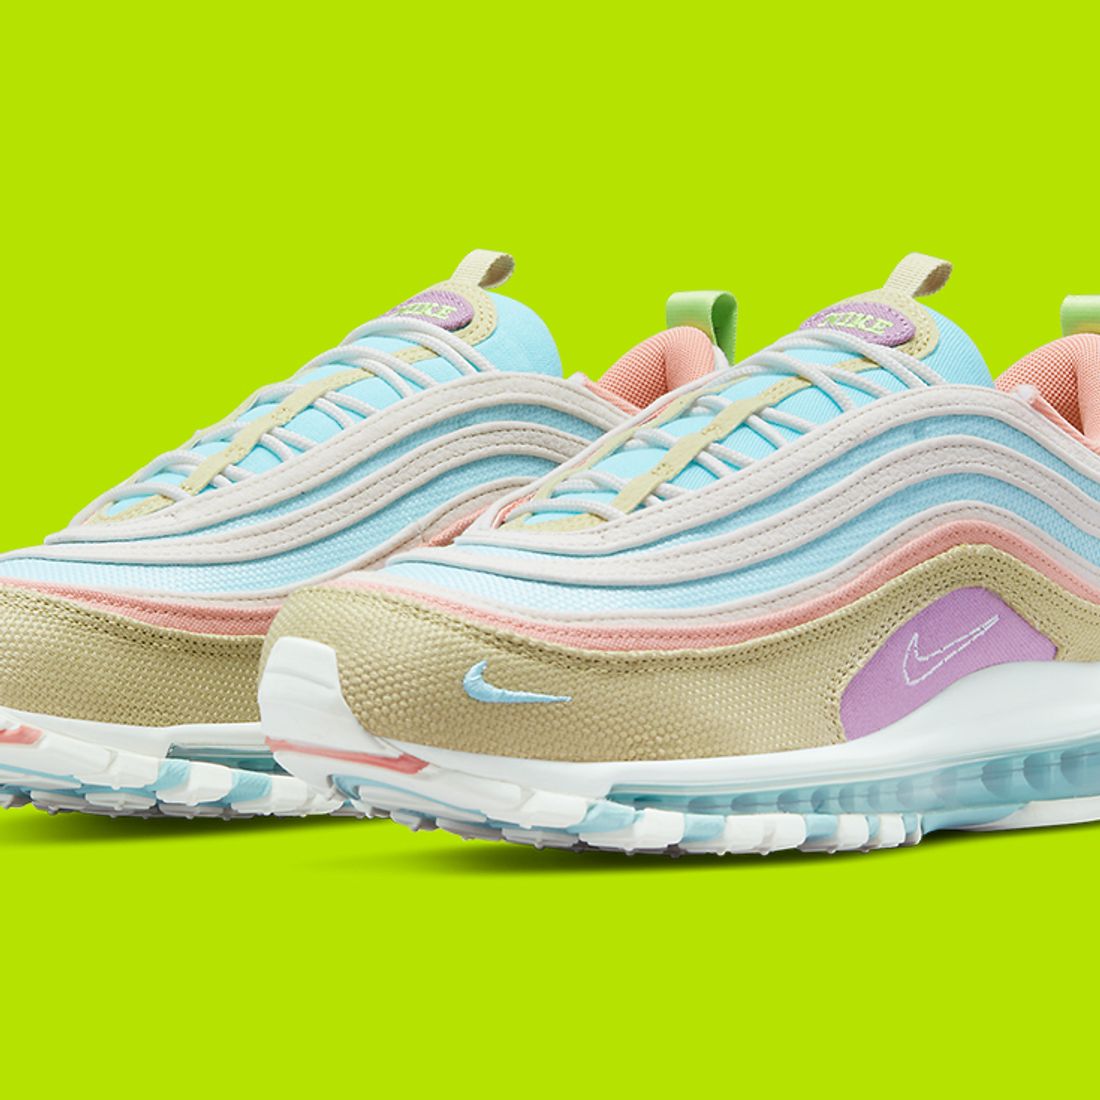 Clamp comfortable Equivalent The Nike Air Max 97 Joins the 'Sun Club' - Sneaker Freaker